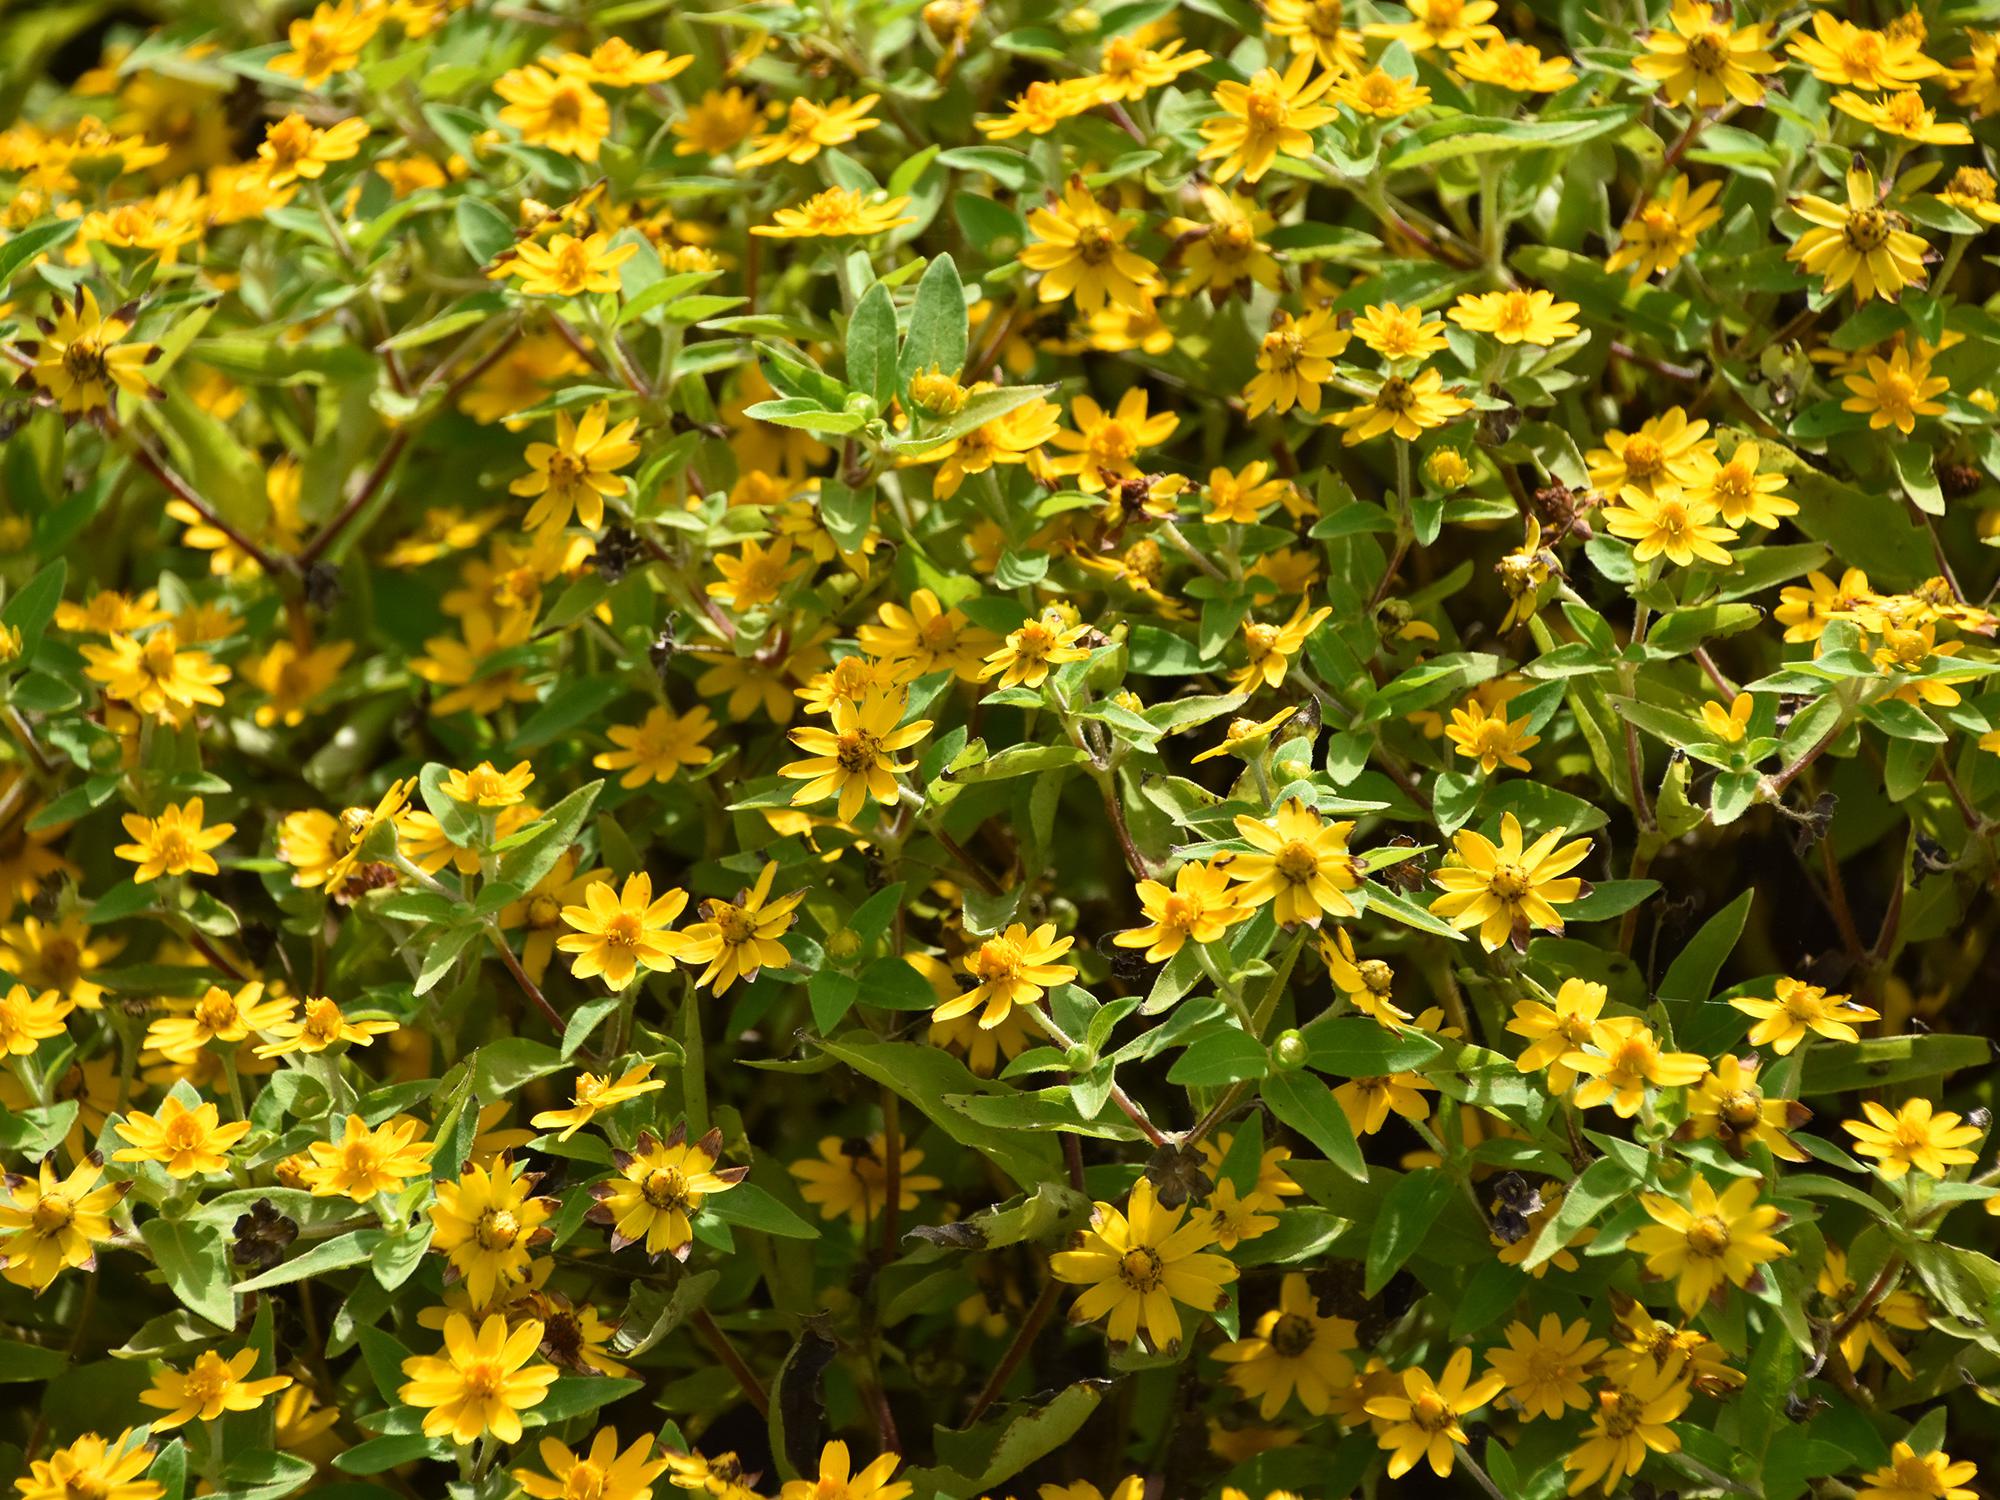 A bed of yellow flowers with green leaves.